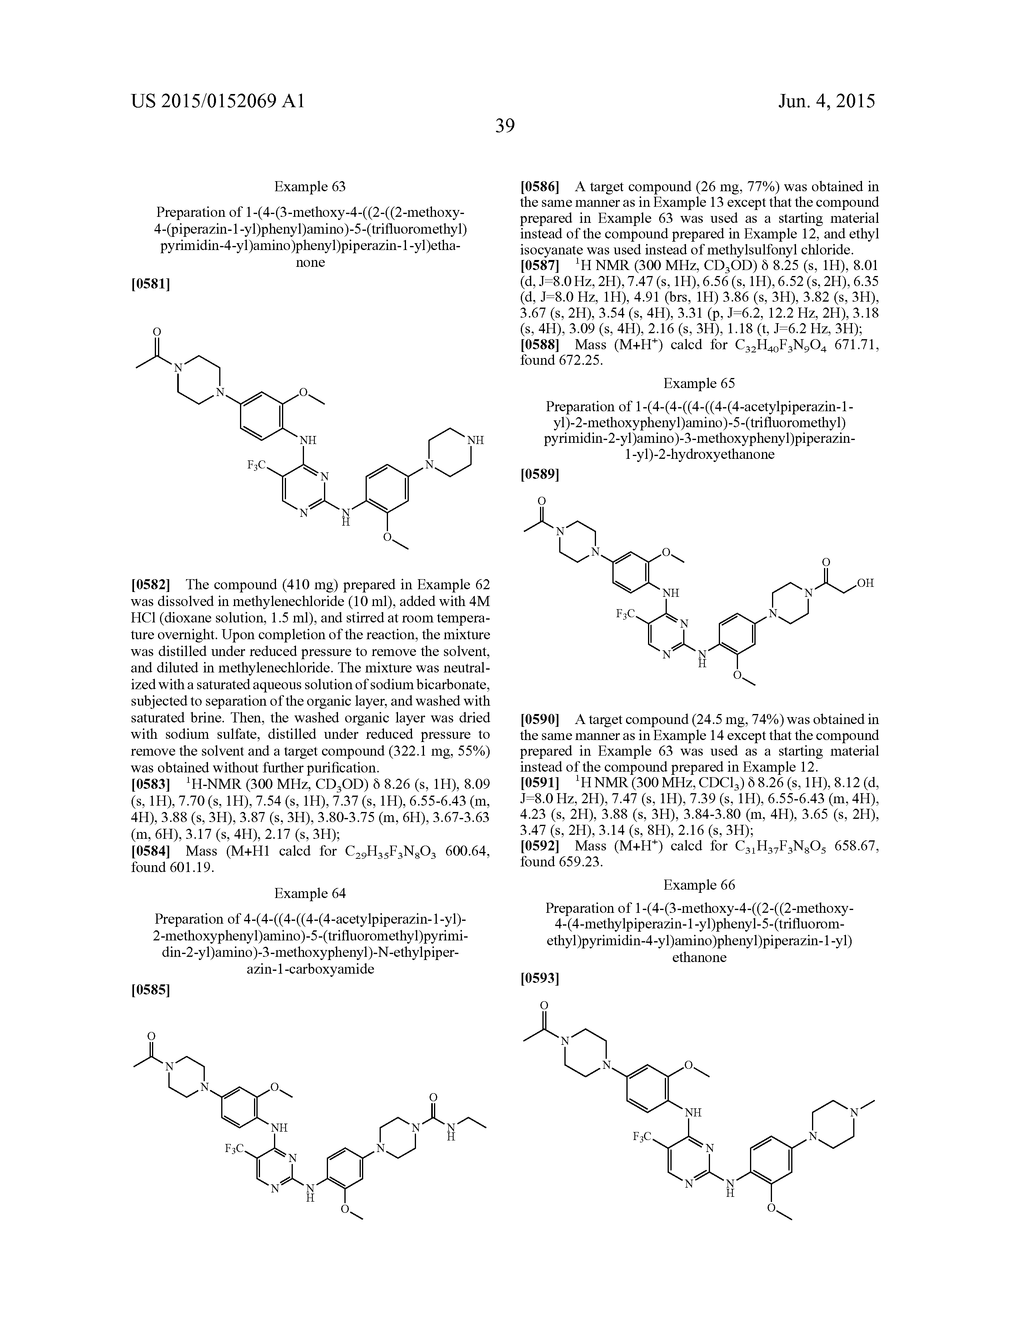 N2,N4-BIS(4-(PIPERAZINE-1-YL)PHENYL)PIRIMIDINE-2,4-DIAMINE DERIVATIVE OR     PHARMACEUTICALLY ACCEPTABLE SALT THEREOF, AND COMPOSITION CONTAINING SAME     AS ACTIVE INGREDIENT FOR PREVENTING OR TREATING CANCER - diagram, schematic, and image 43